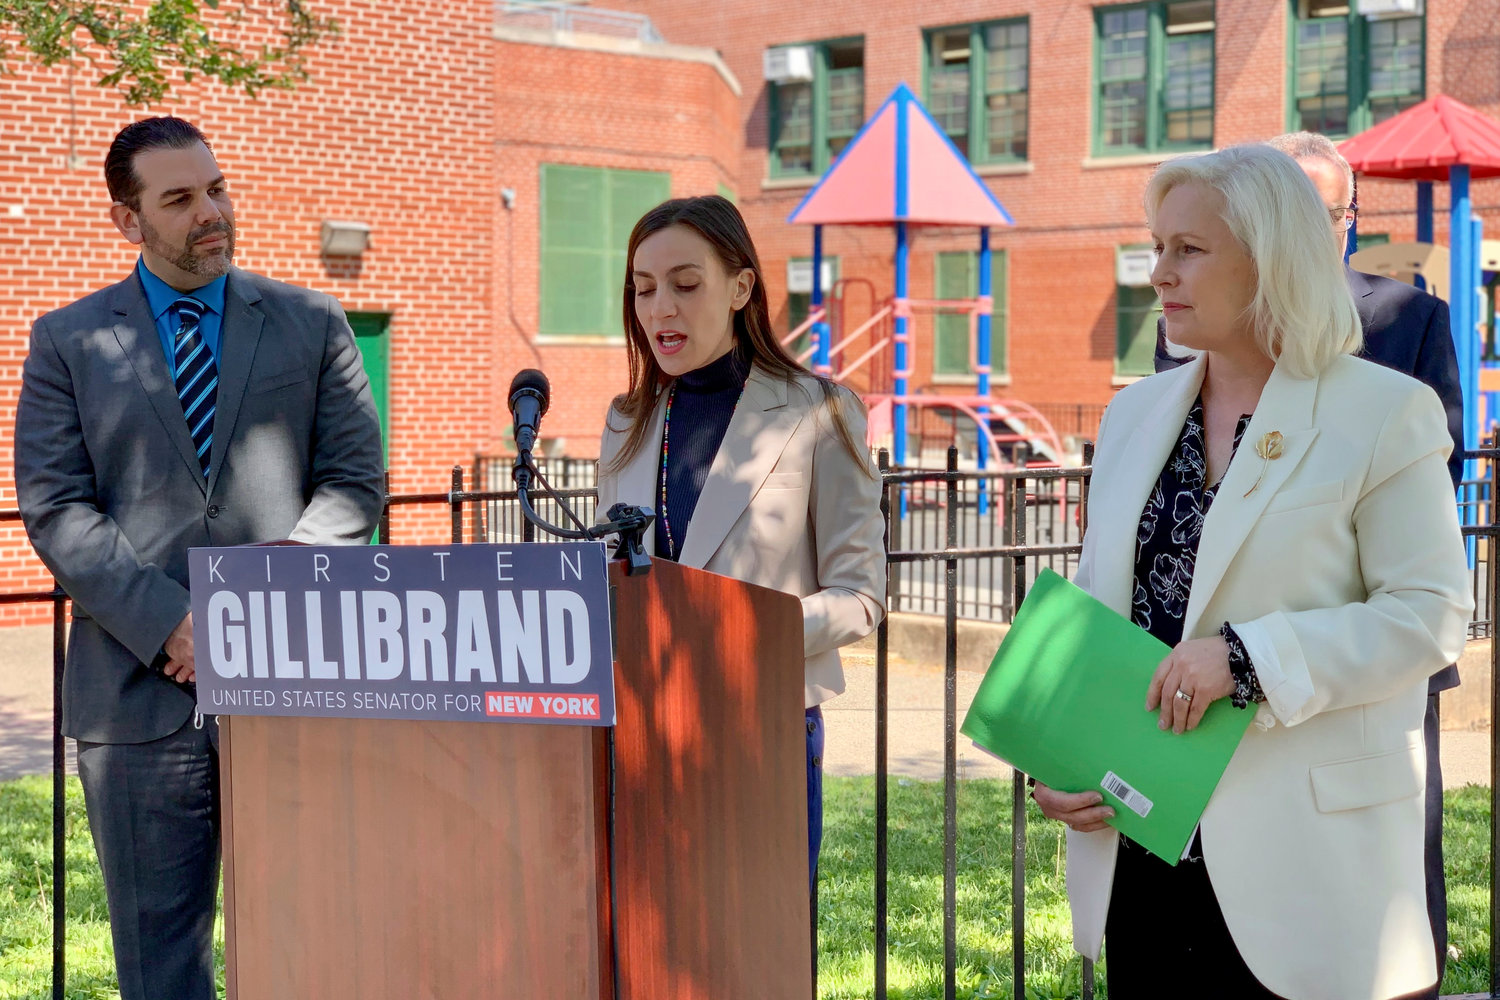 State Sen. Alessandra Biaggi was one of several local electeds who stood in support of the Universal School Meals Program Act. If signed into law, the bill intends to make schools providers of breakfast, lunch and dinner.